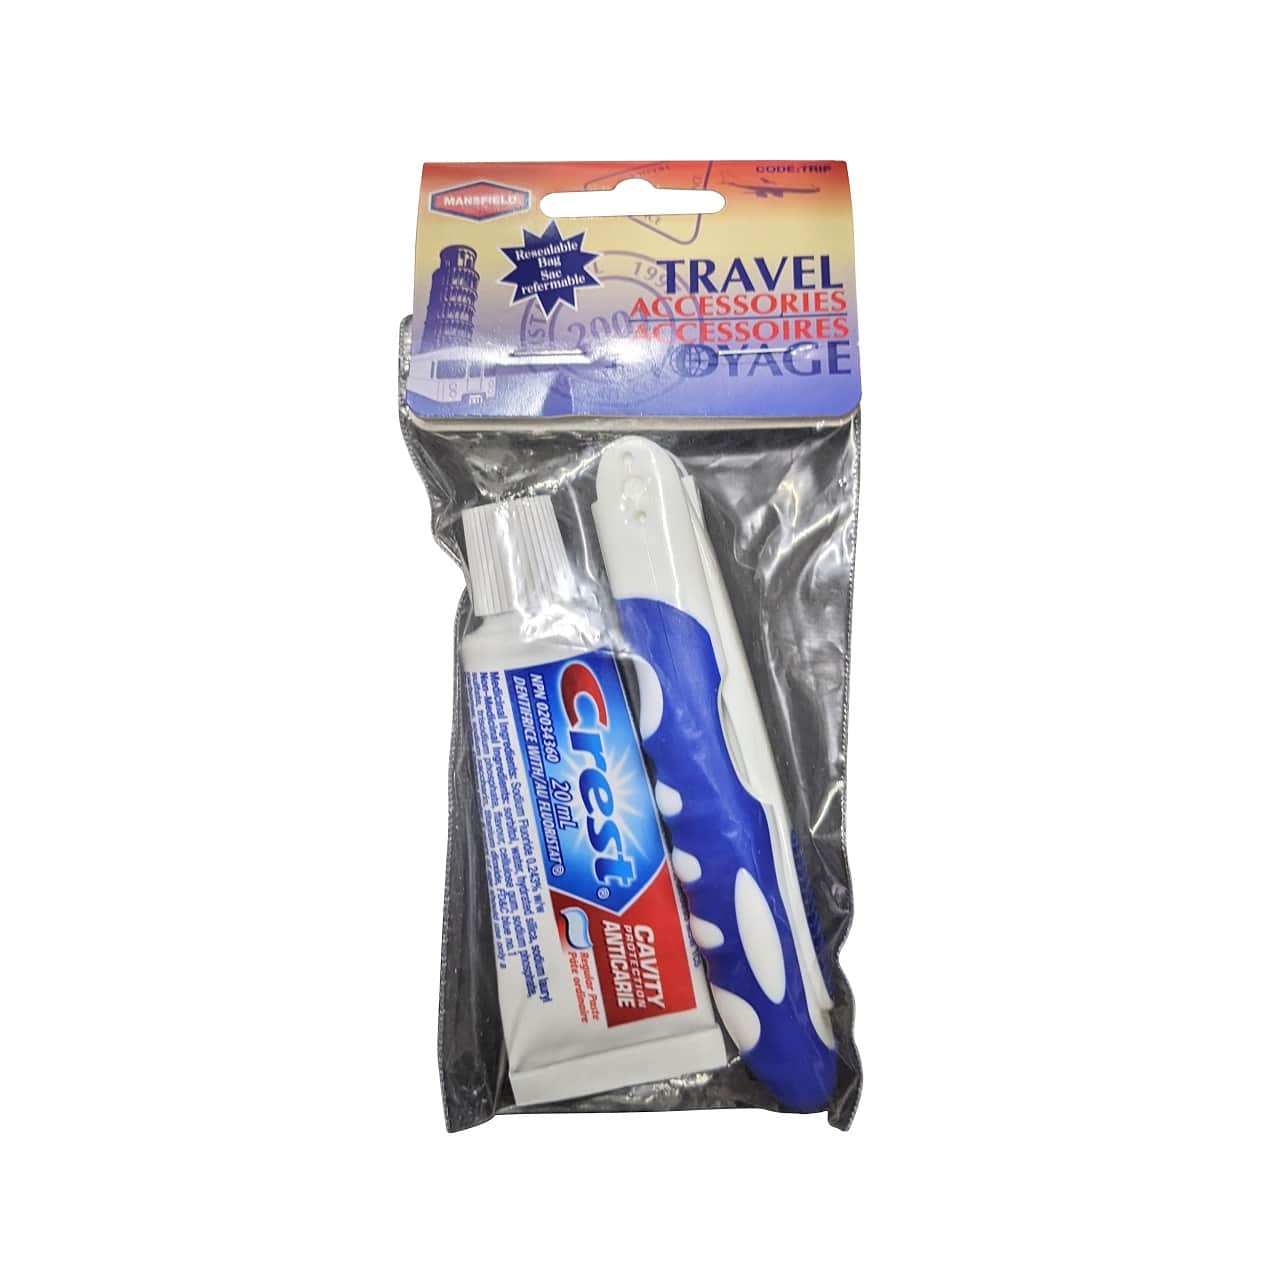 Product label for Mansfield Travel Accessories Toothbrush and Toothpaste